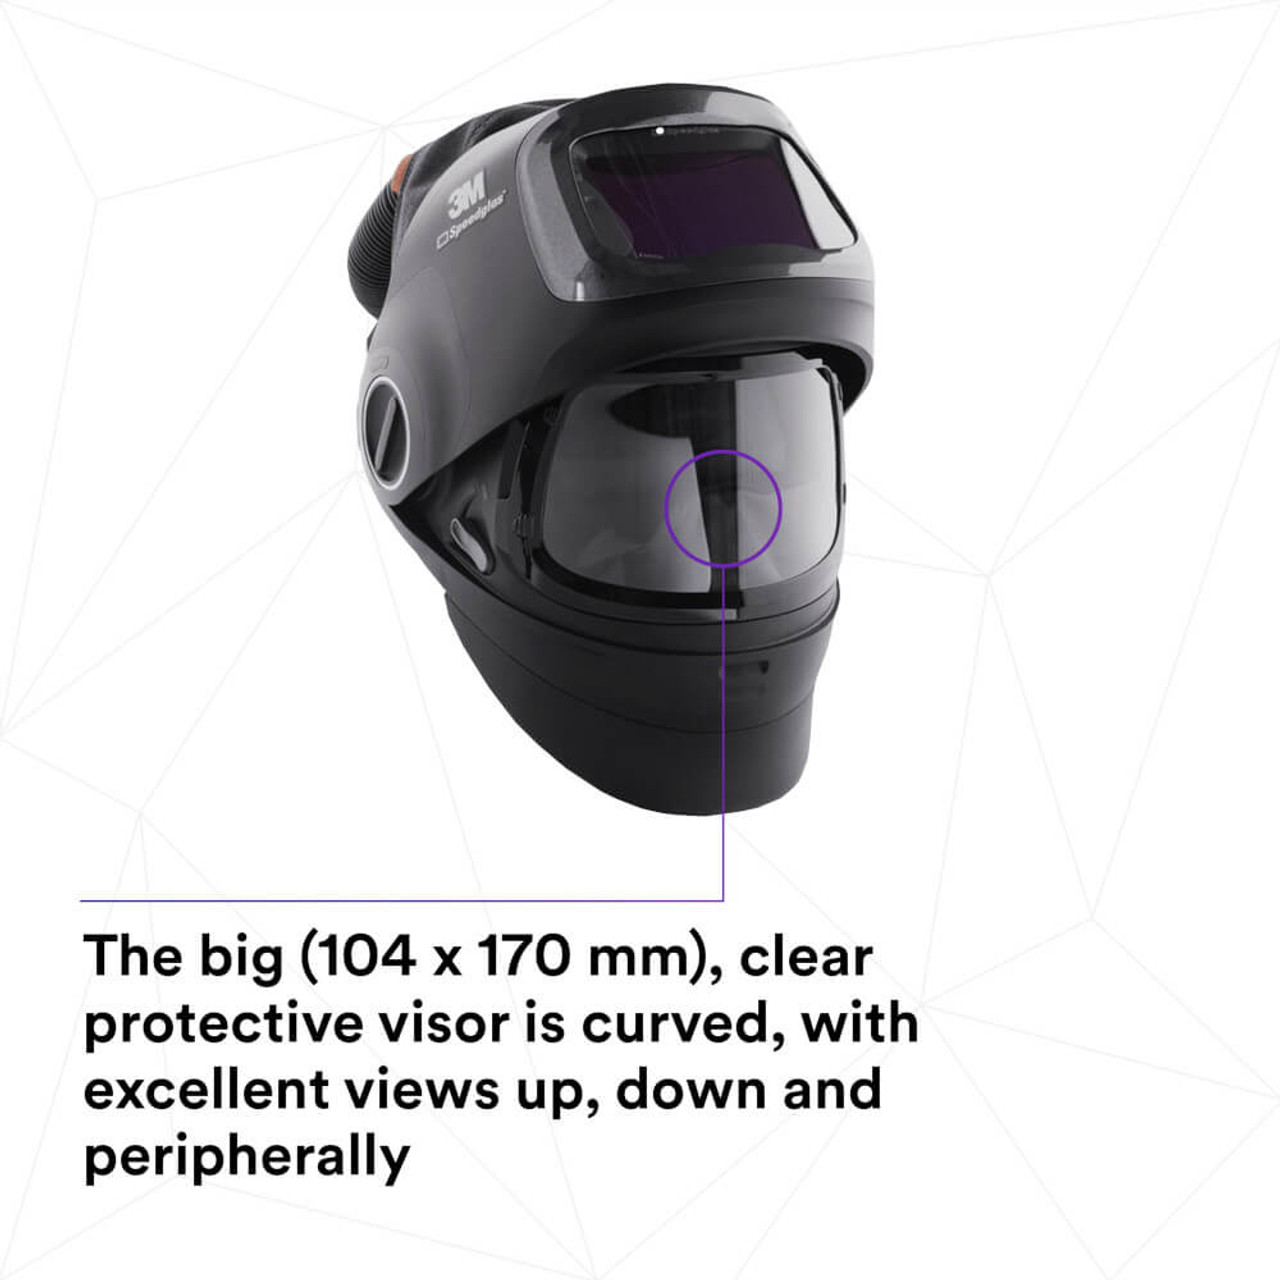 3M Speedglas Helmet Overview for G5-01VC Powered Air Kit, model 611130, presenting key specifications and benefits of this advanced welding respiratory PPE equipment for comprehensive head and respiratory protection.